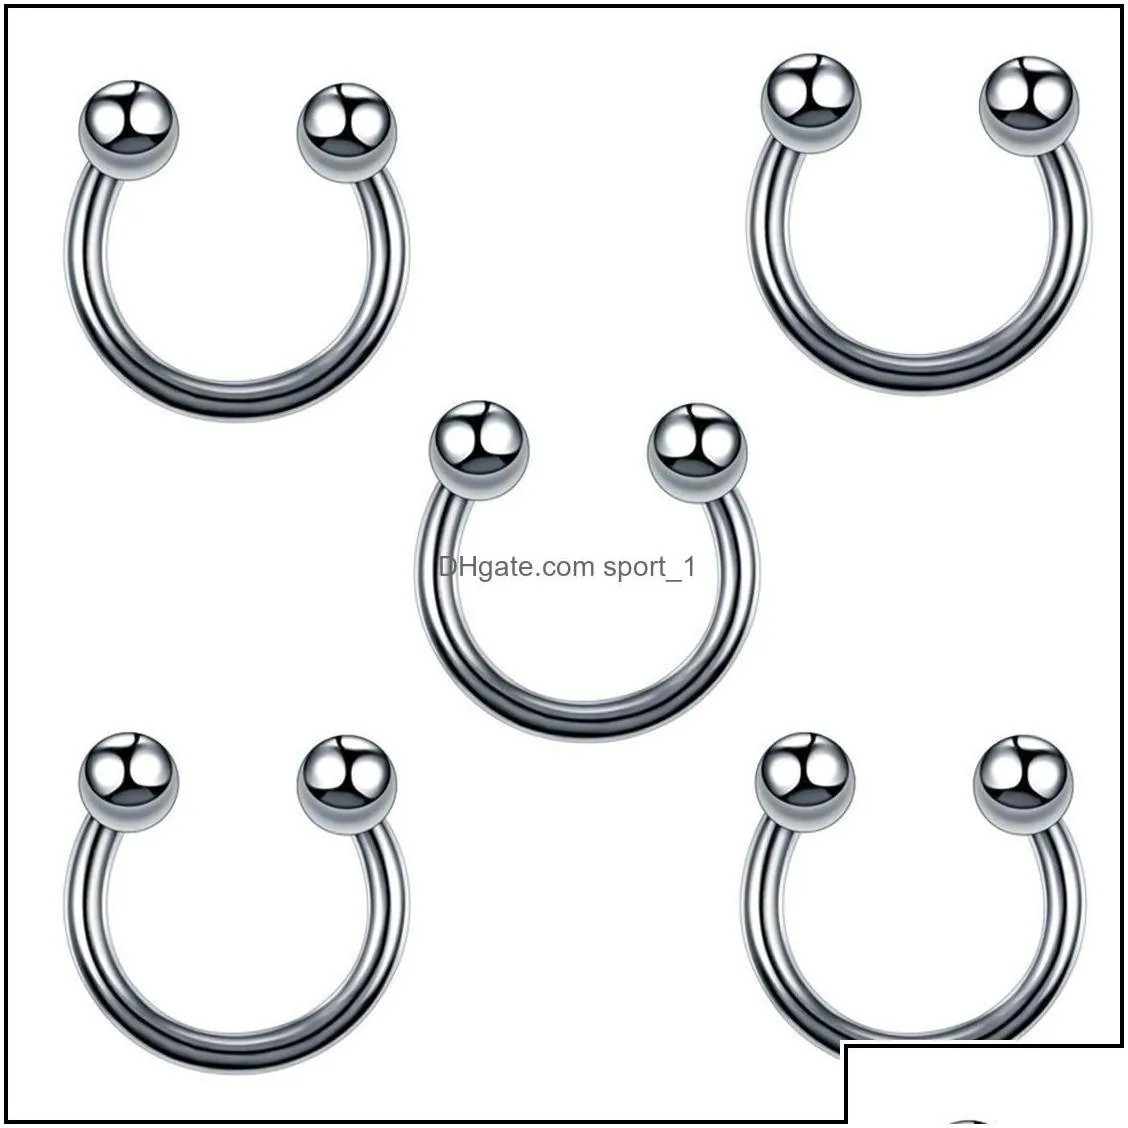 jewelrystainless steel set tongue rings body piercing eyebrow belly nose nail jewelry aessories 120 mixes wholesale drop delivery 2021